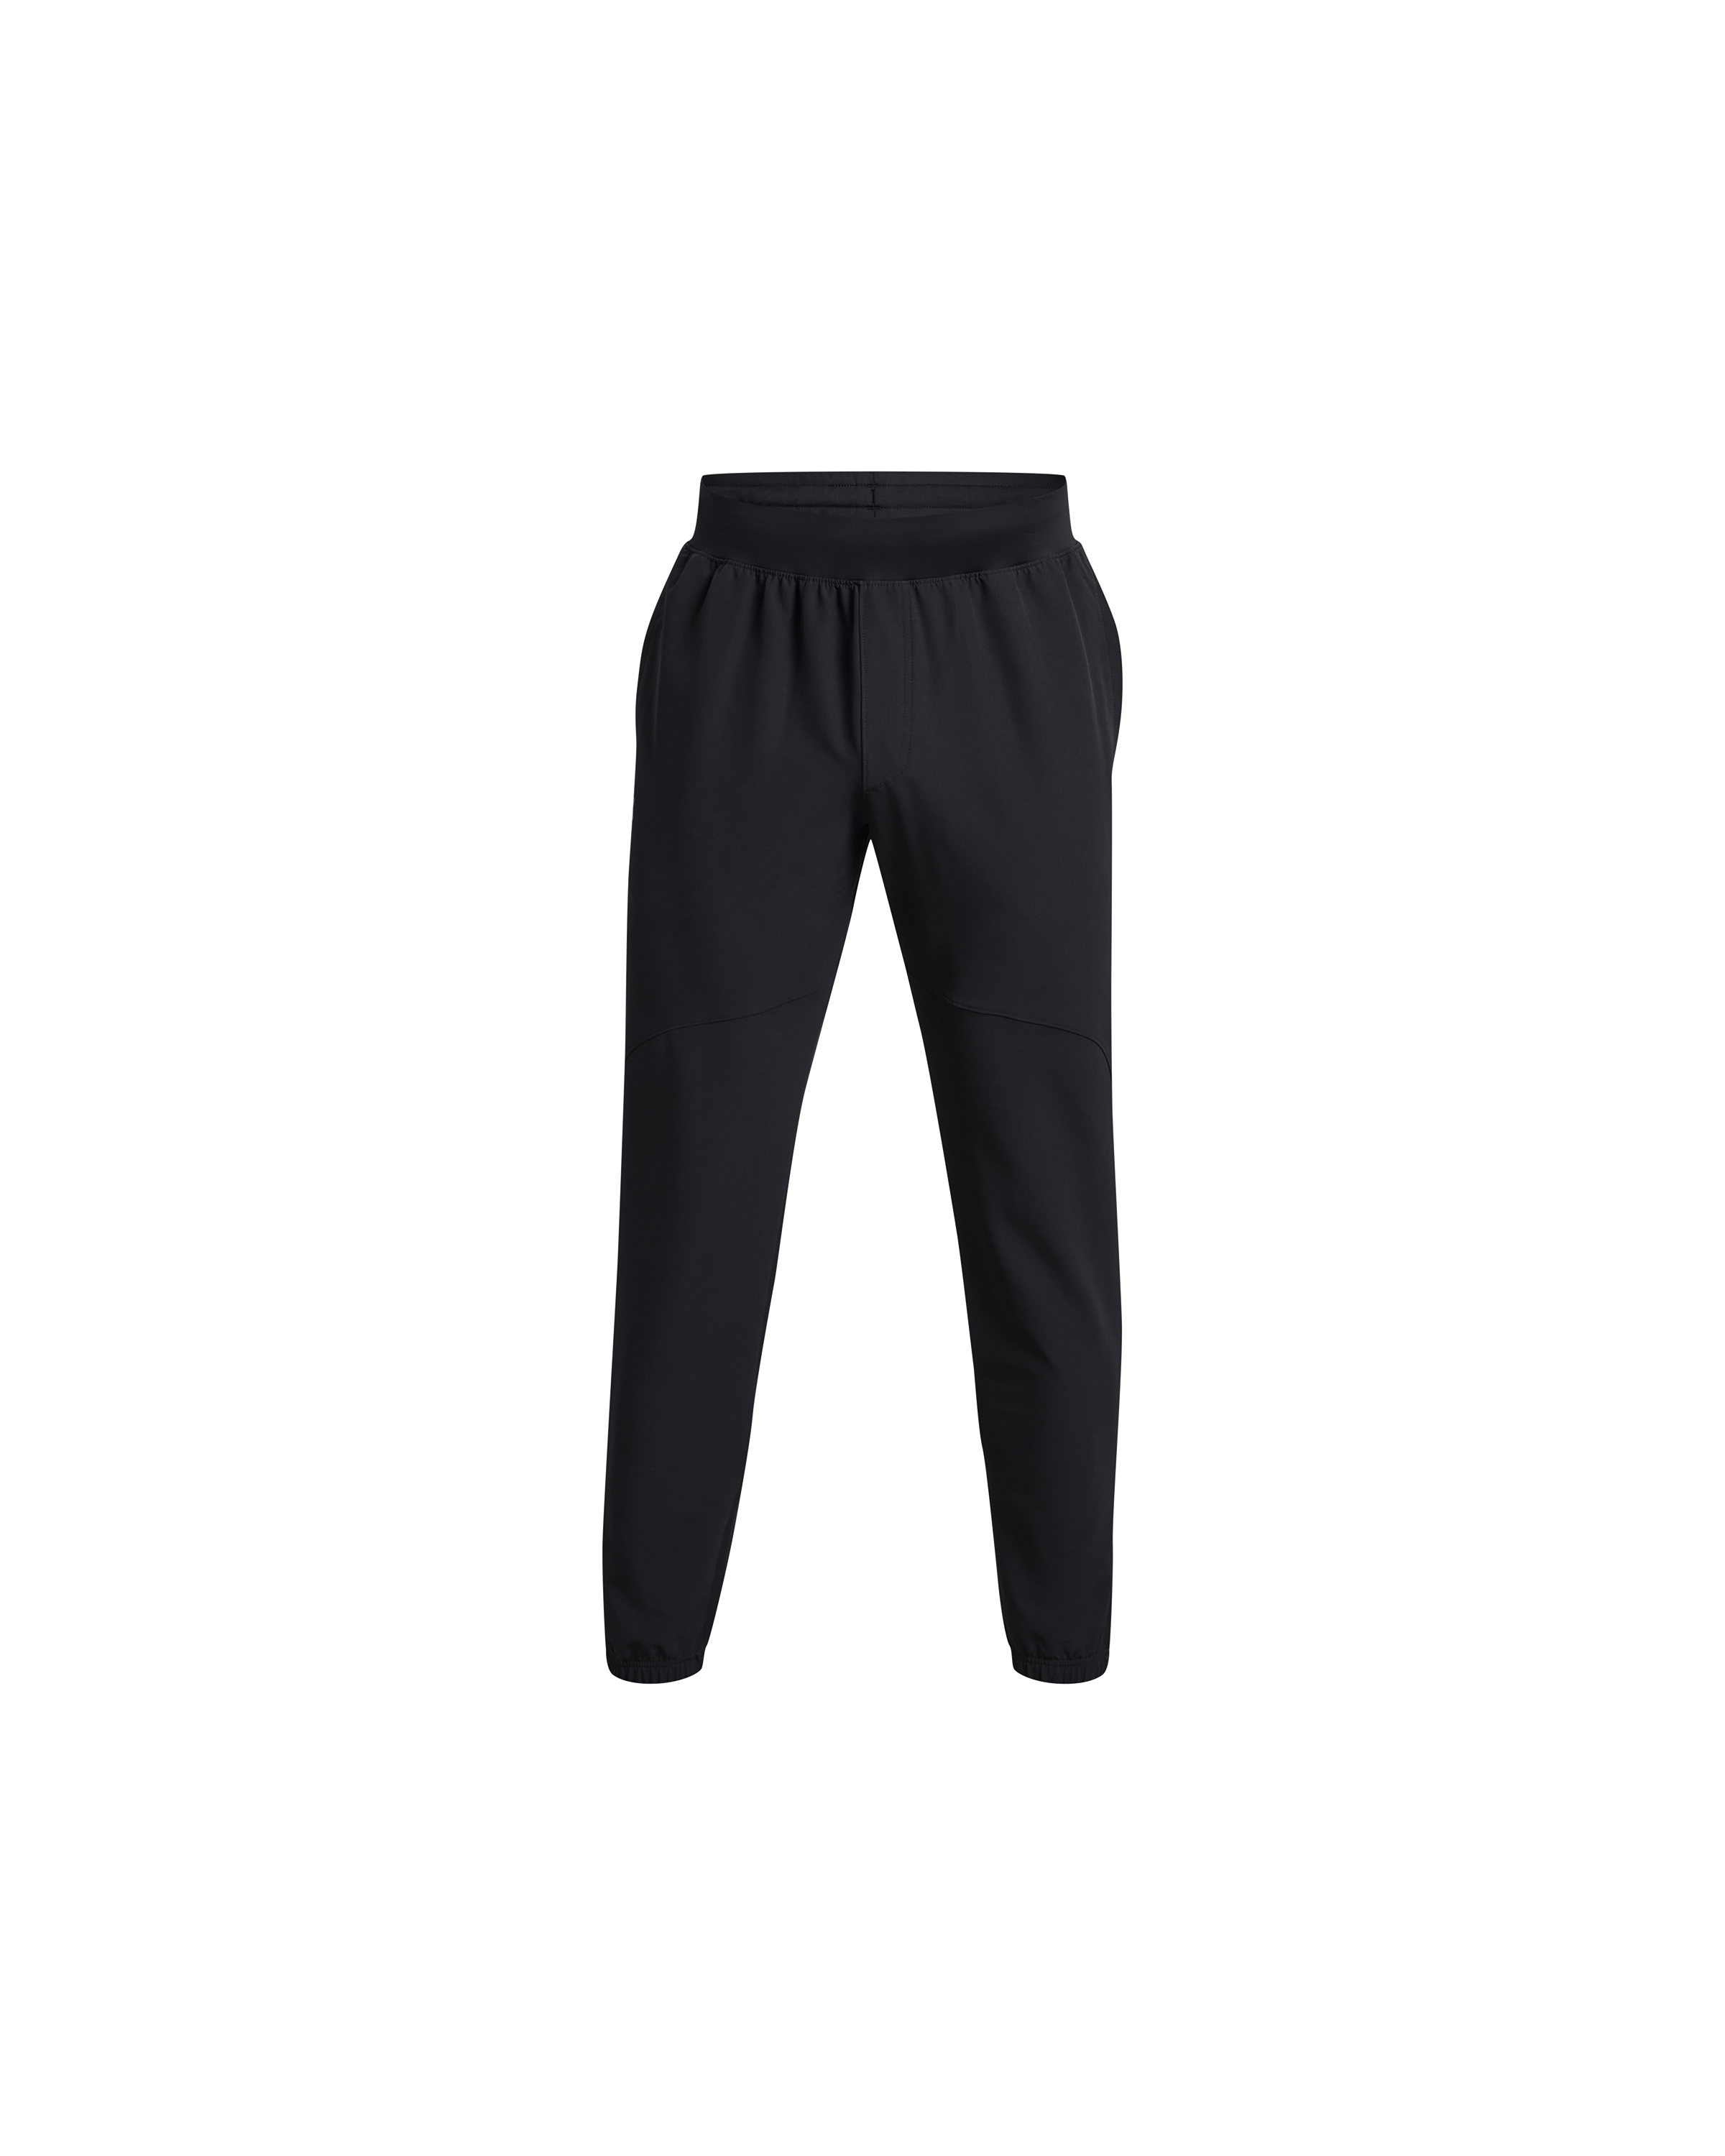 Men's Stretch Woven Cold Weather Joggers from Under Armour